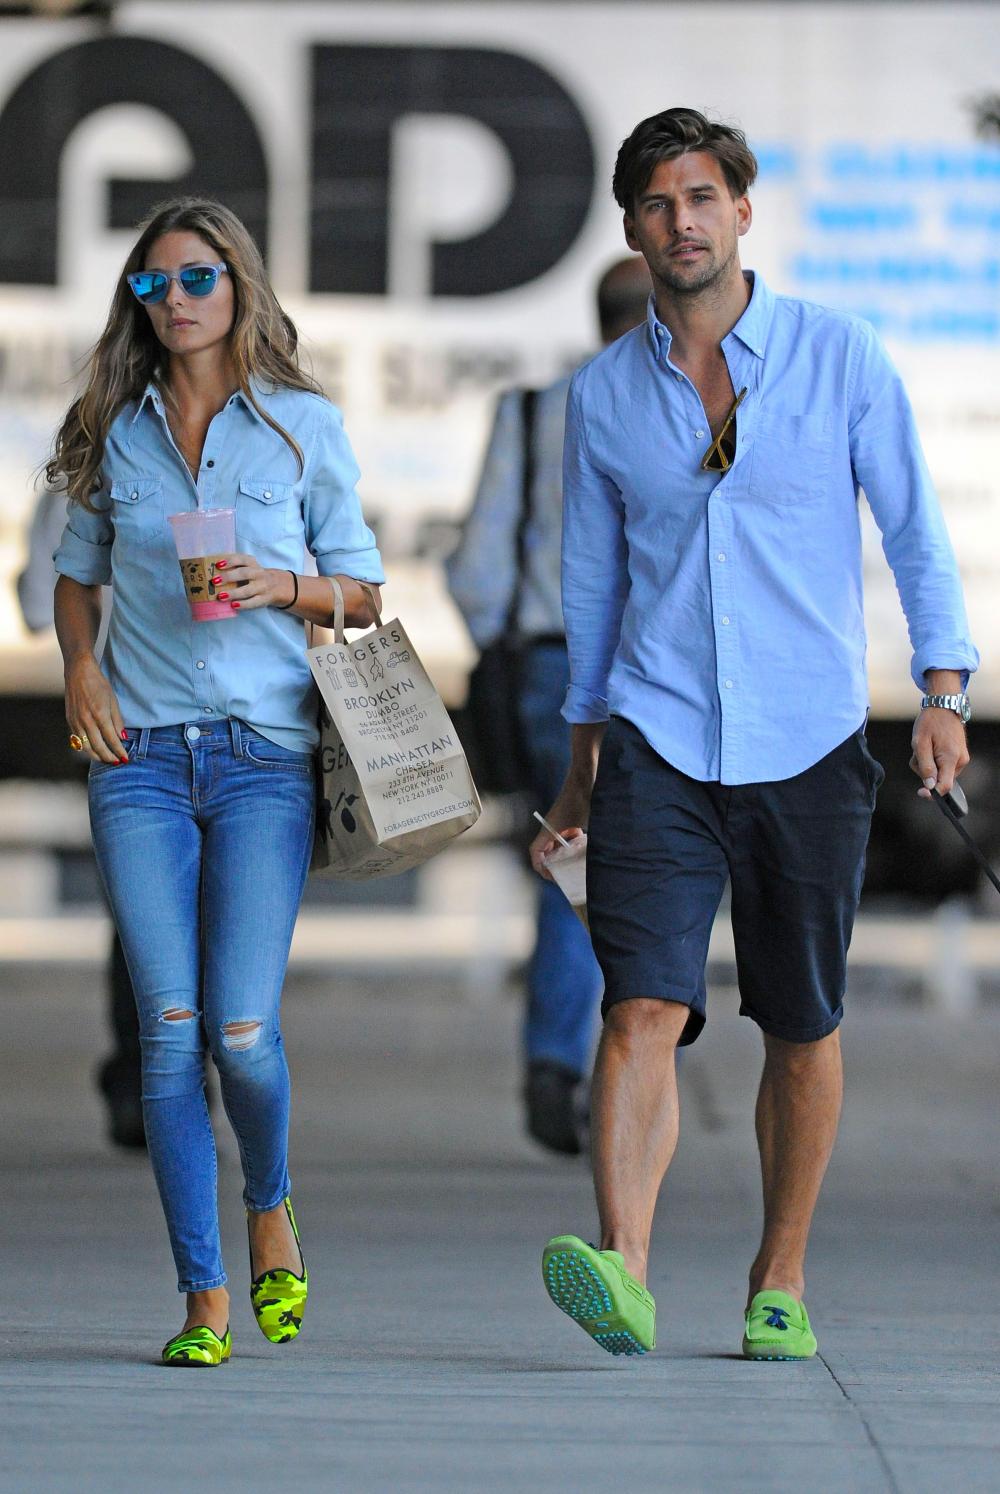 The best examples of perfectly dressed couples in the summer season